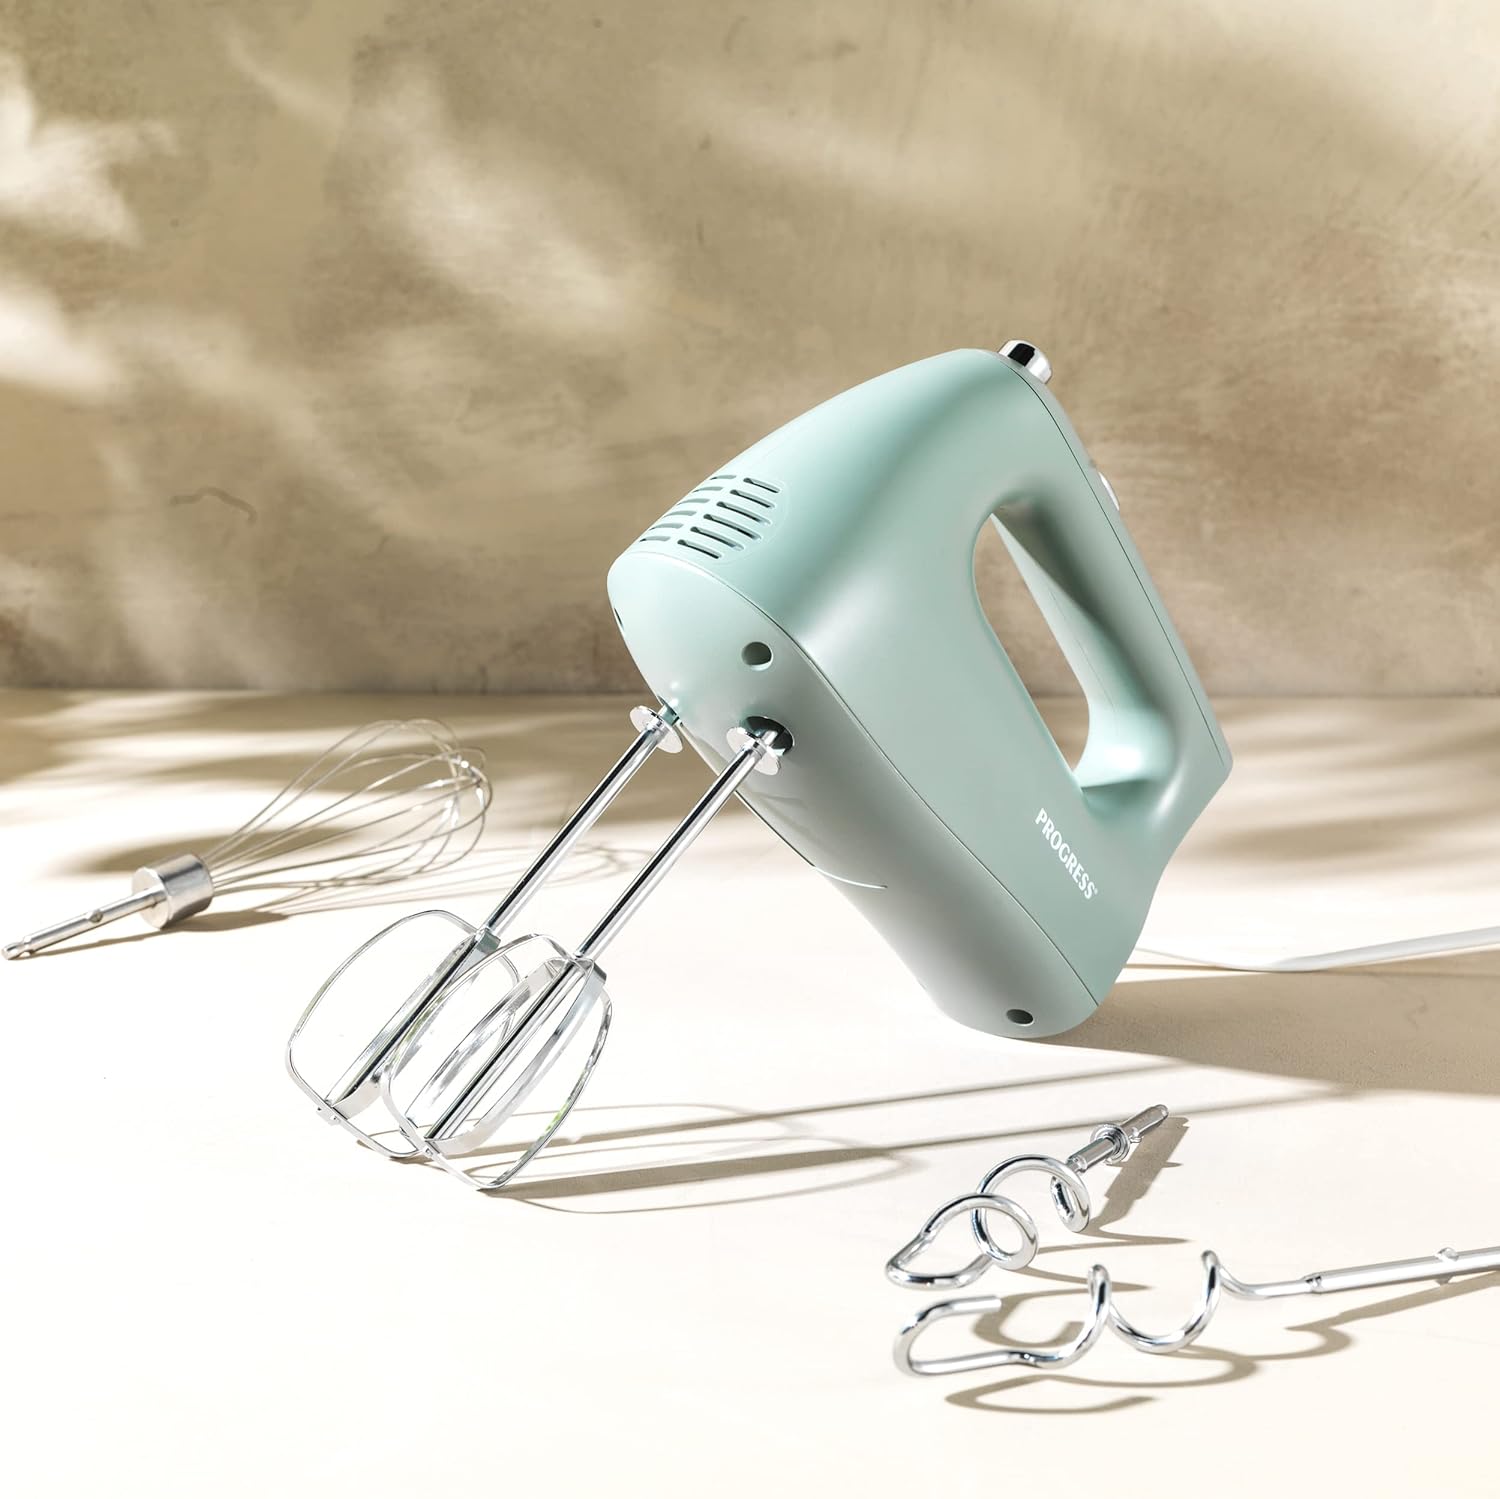 Progress EK5233PTEAL Go Bake! Hand Mixer – Electric Baking Whisk with 5 Speed Settings, 2 Stainless Steel Mixing Beaters & Dough Hooks, Cake Mixer with Eject Function for Easy Cleaning, 250W, Teal - Amazing Gadgets Outlet